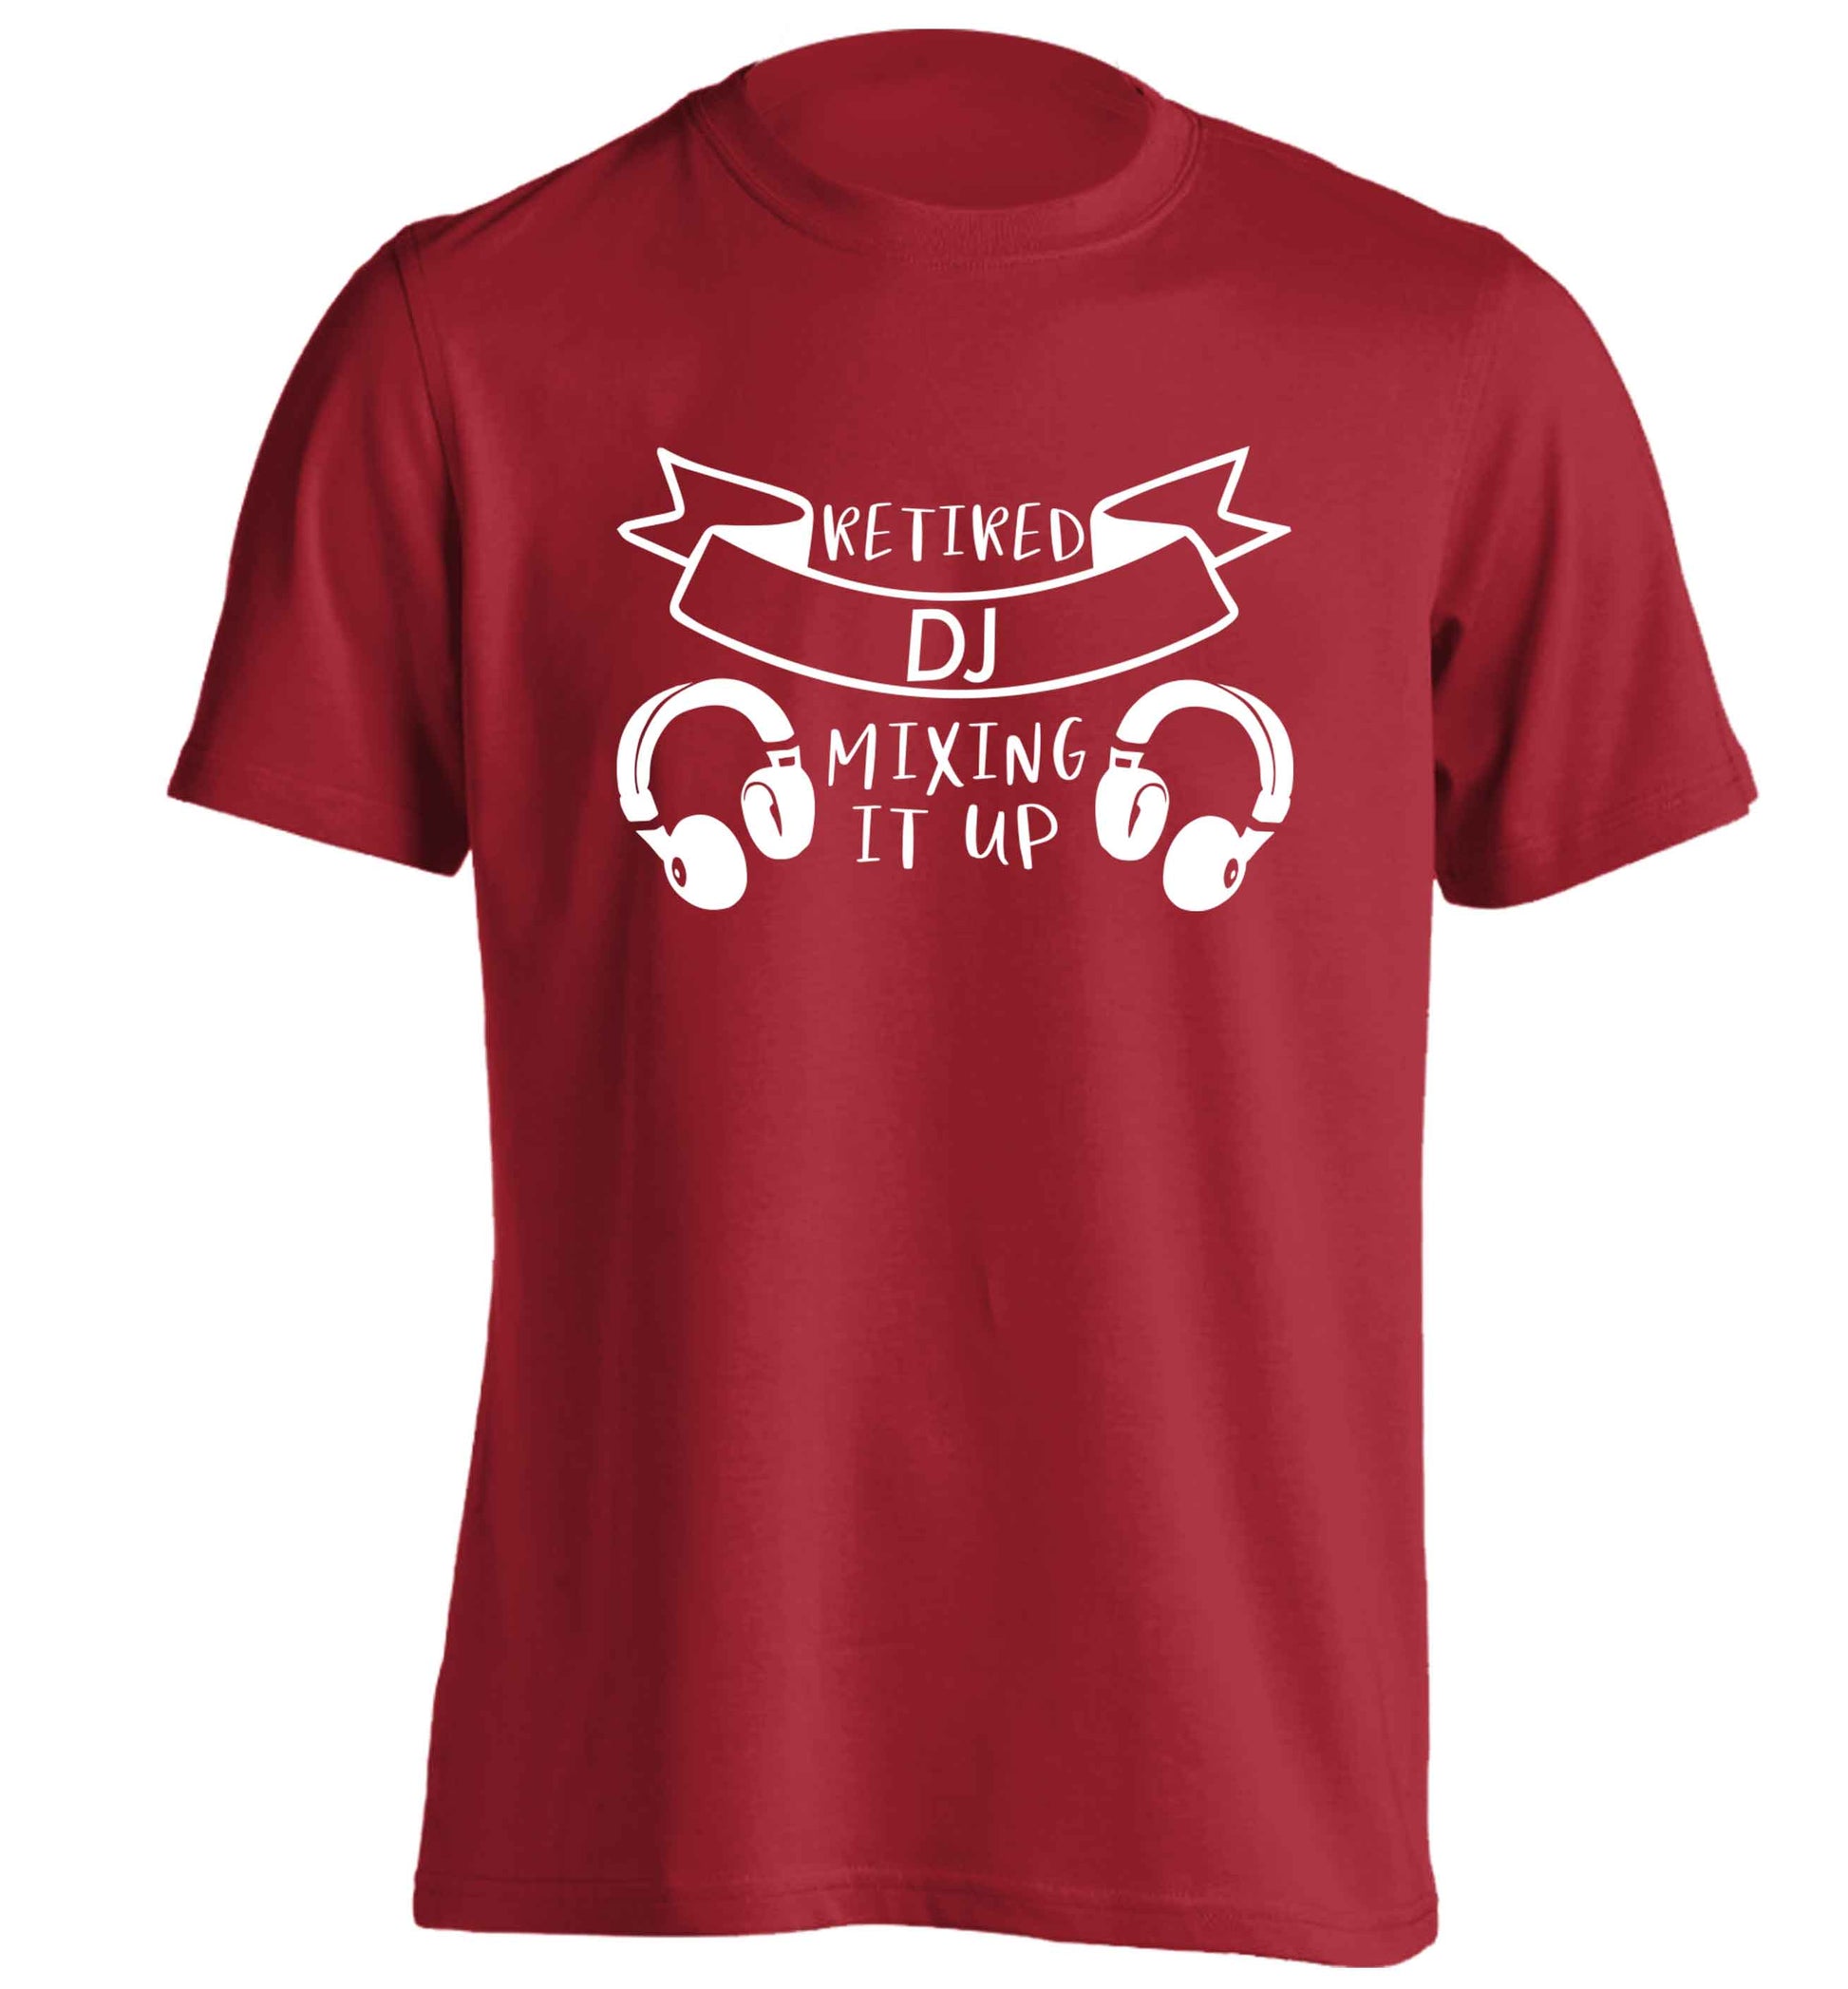 Retired DJ mixing it up adults unisex red Tshirt 2XL